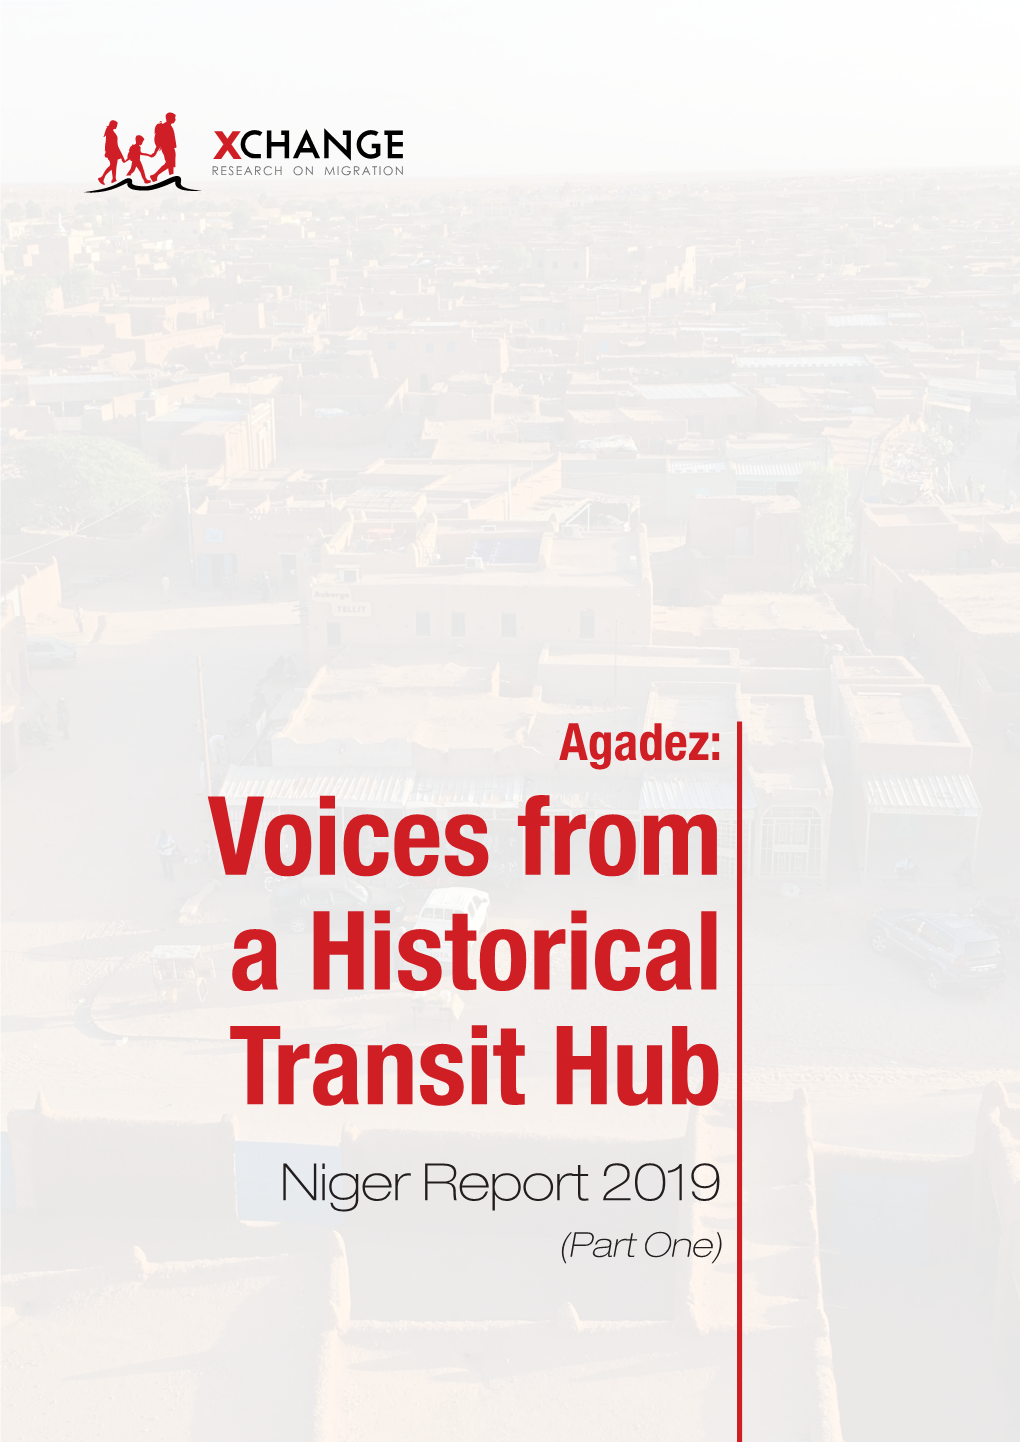 Voices from a Historical Transit Hub Niger Report 2019 (Part One) AGADEZ: VOICES from a HISTORICAL TRANSIT HUB NIGER REPORT 2019 (PART ONE)